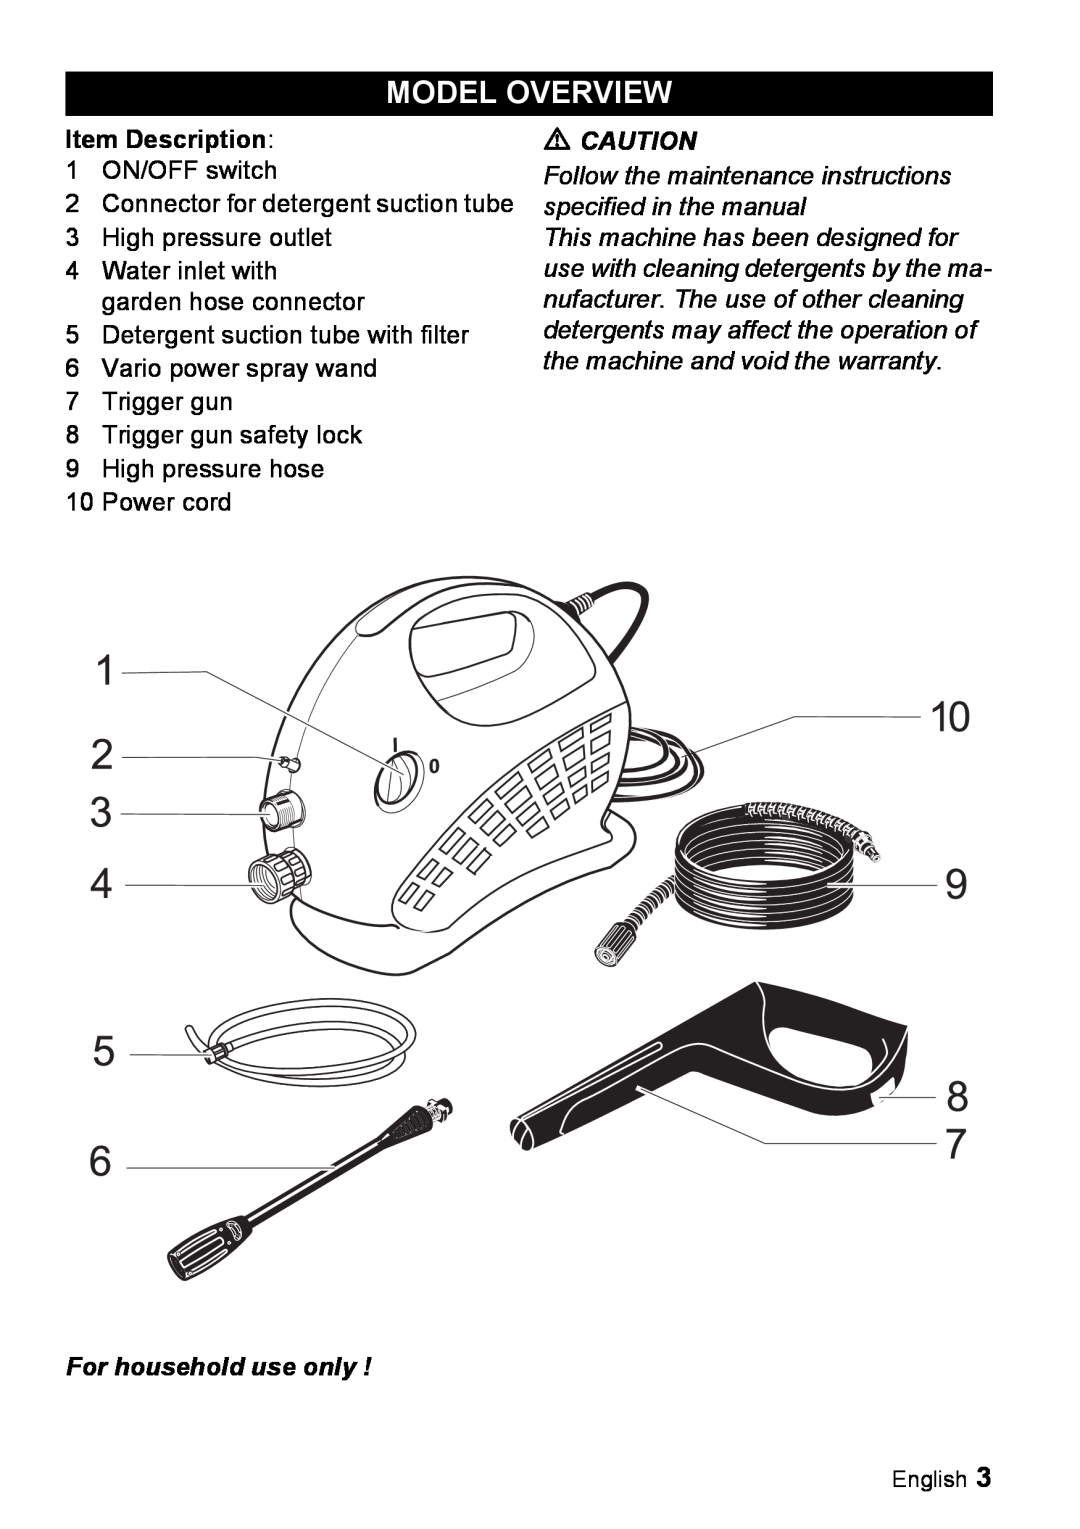 Karcher K 2.01 manual Model Overview, For household use only, Item Description: 1 ON/OFF switch 